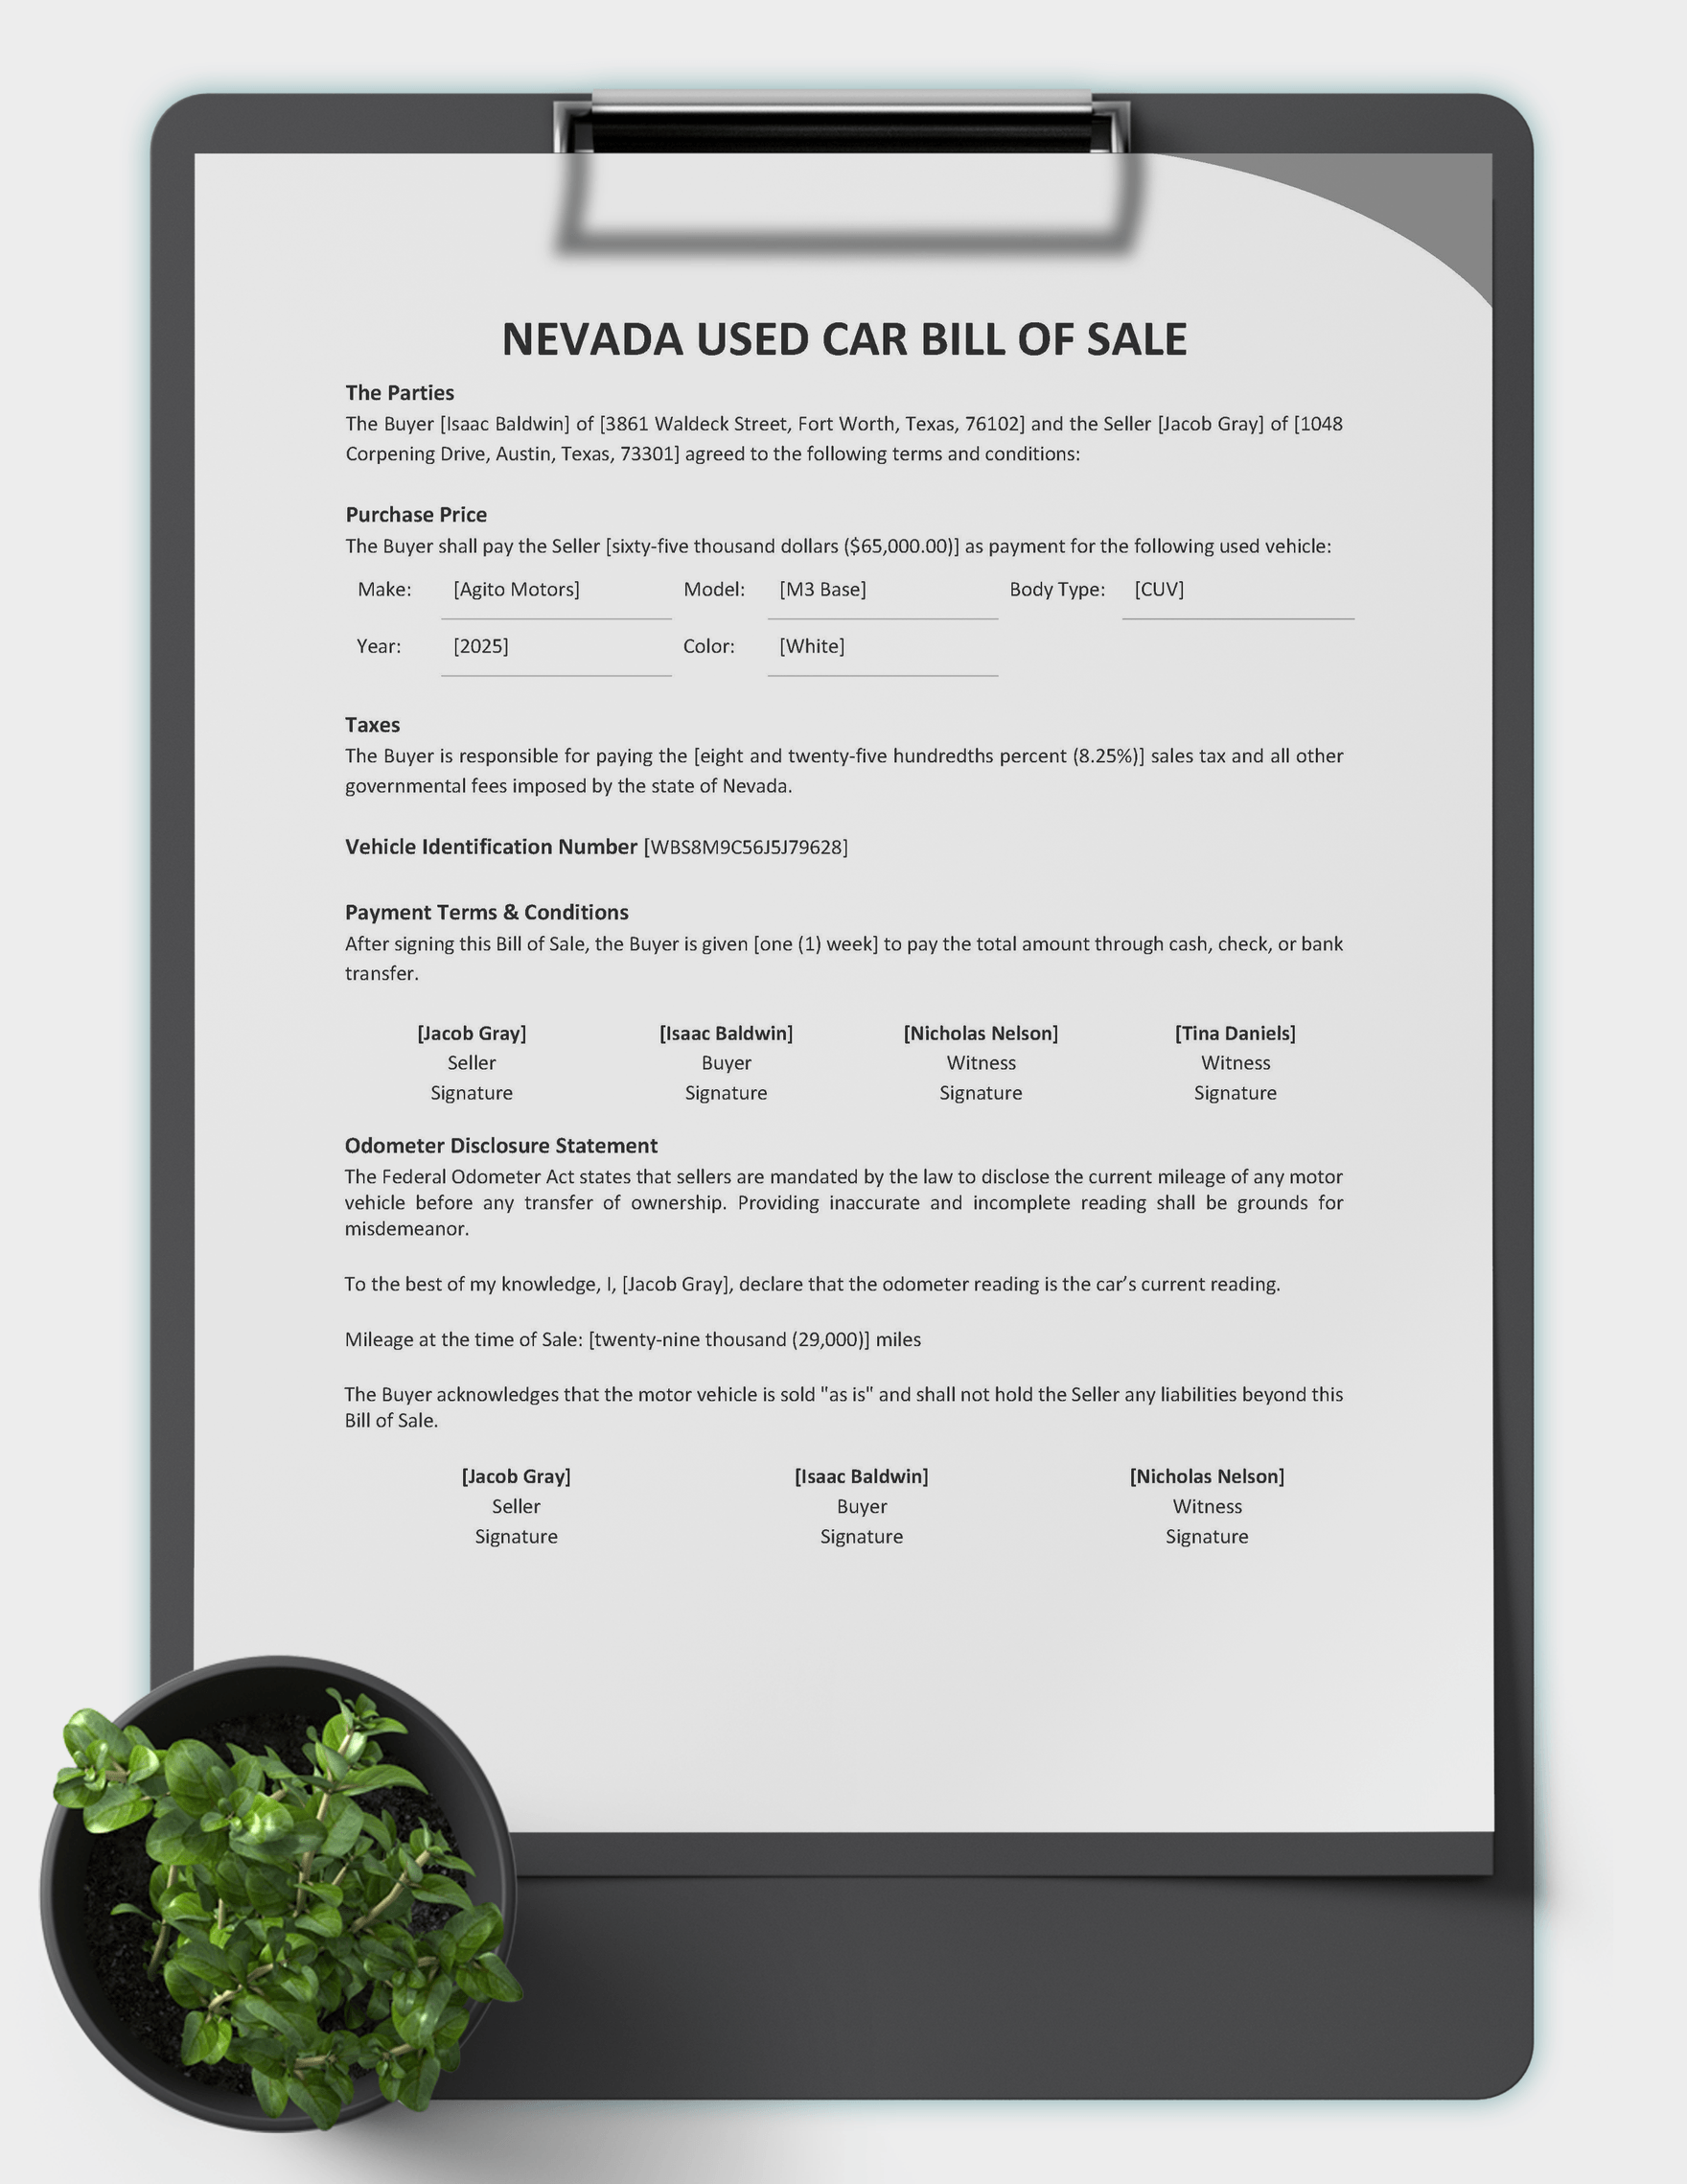 Nevada Used Car Bill of Sale Template